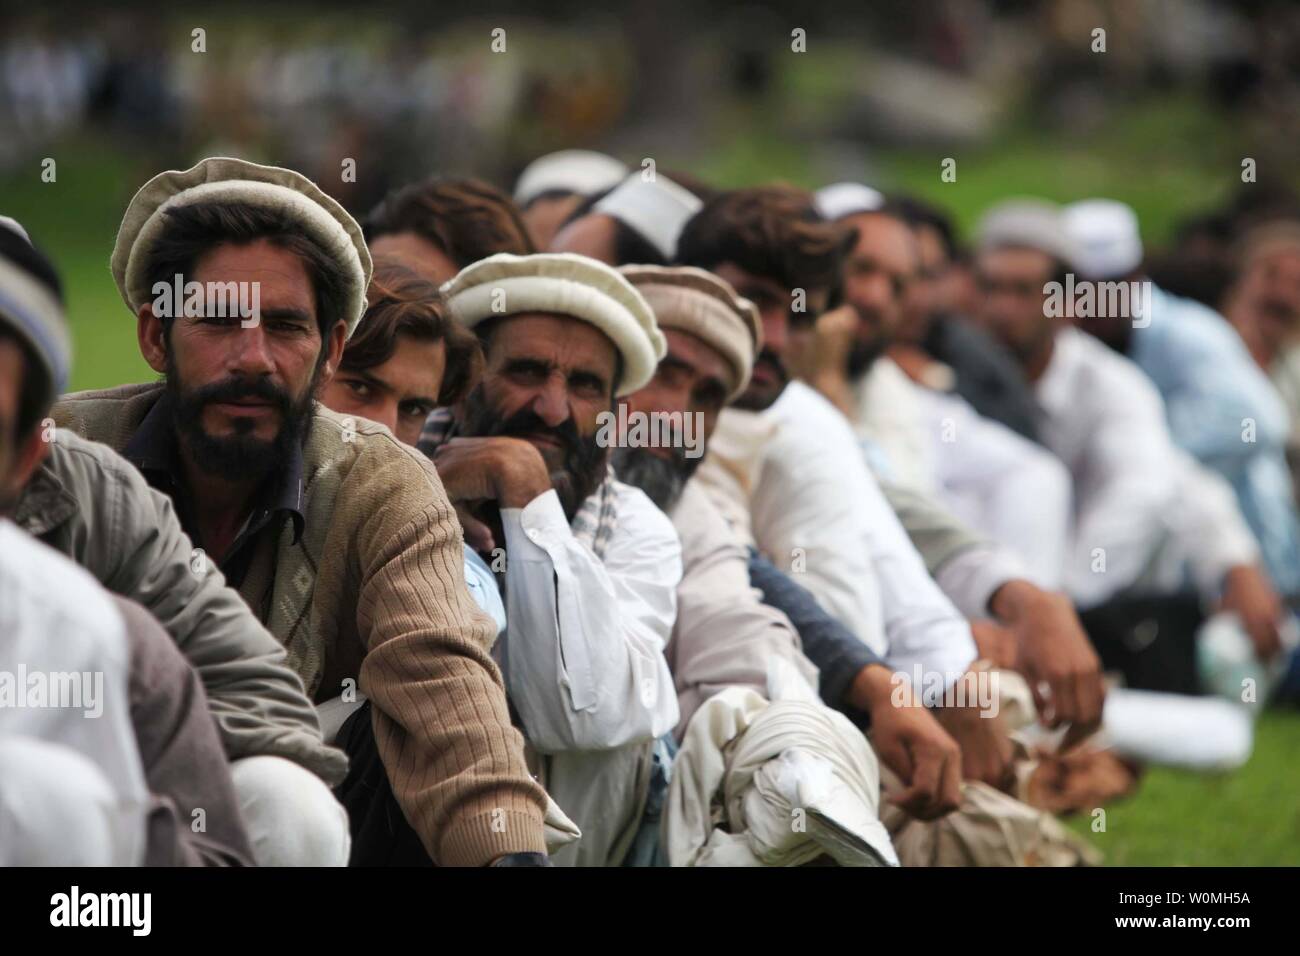 Pakistani civilians wait to board a CH-53E Super Stallion helicopter during humanitarian relief efforts in the Khyber-Pakhtunkhwa province, Pakistan on August 18, 2010 after massive floods devastated the country.  UPI/Paul Duncan/U.S. Military Stock Photo